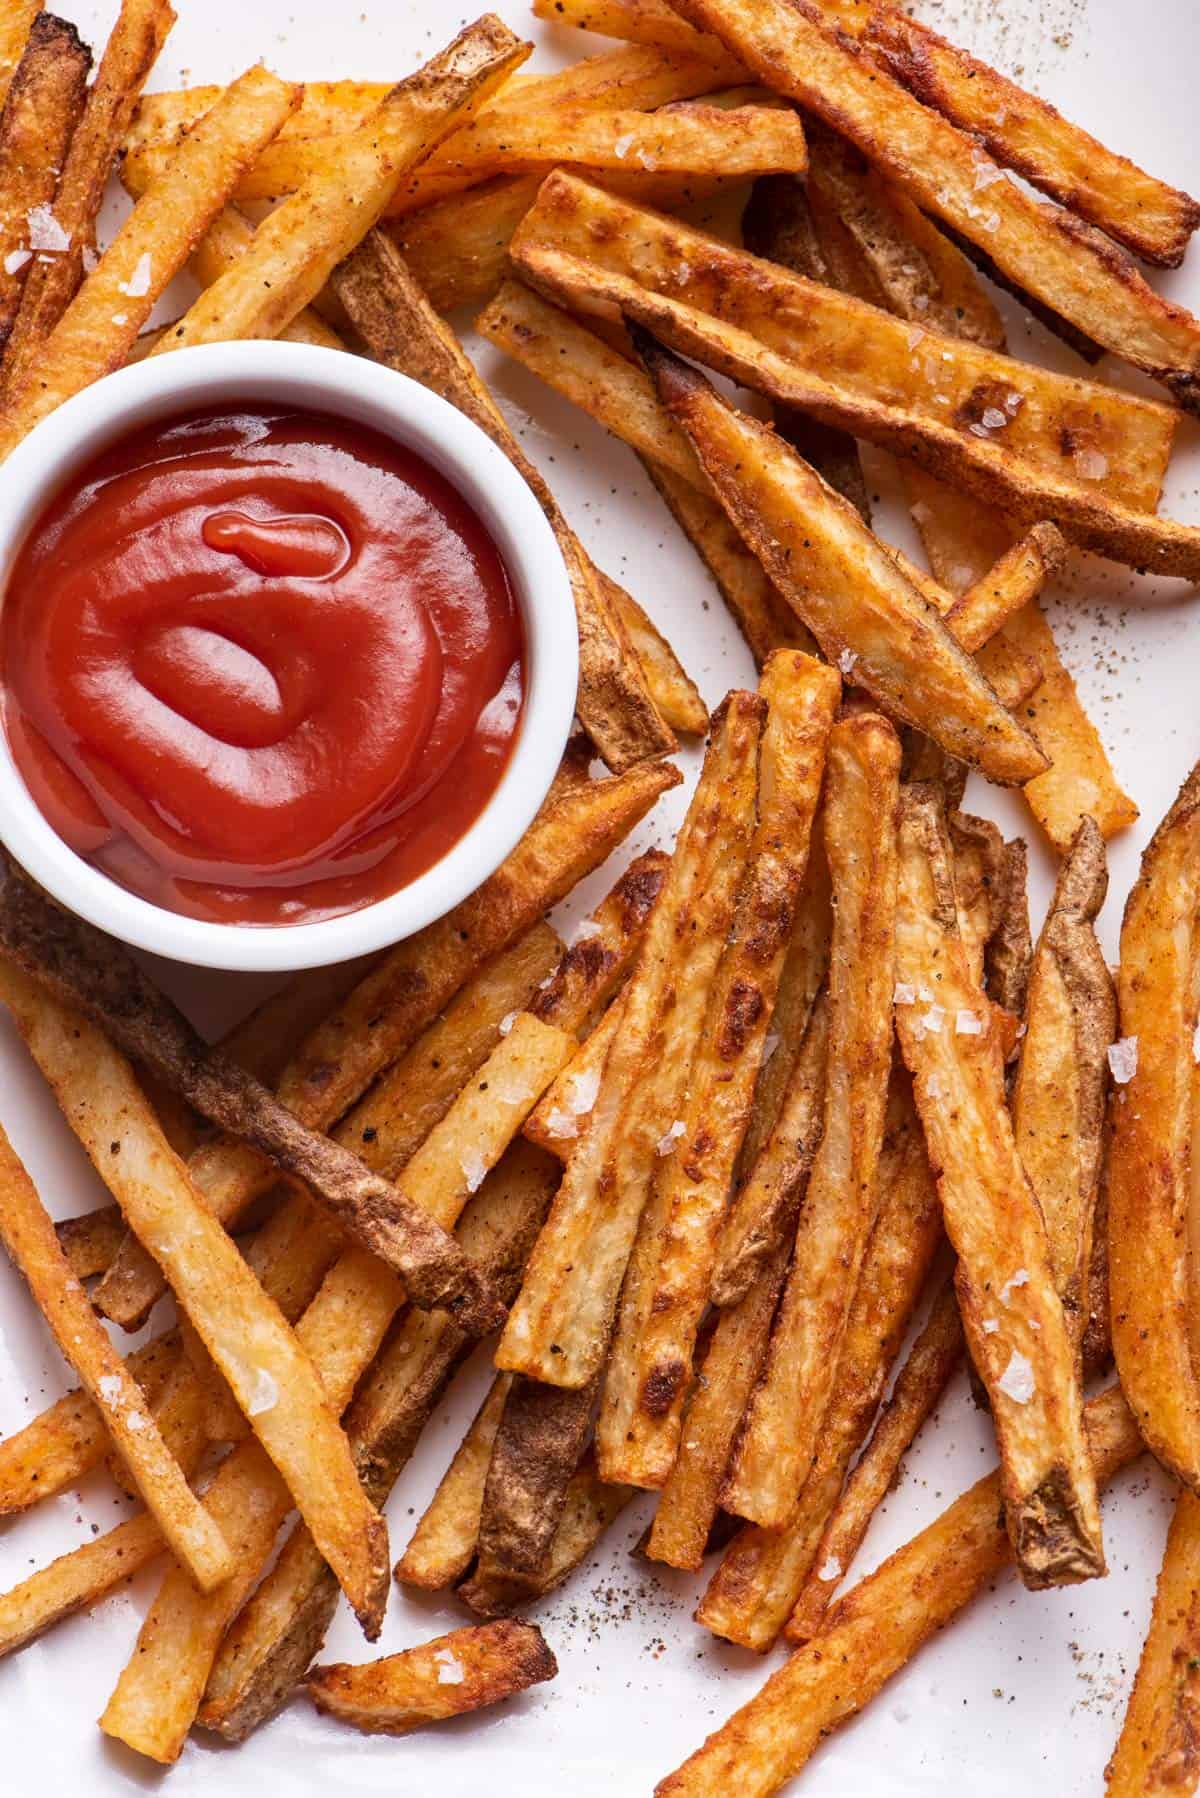 Afm Ontevreden Achteruit Oven Baked French Fries - FeelGoodFoodie